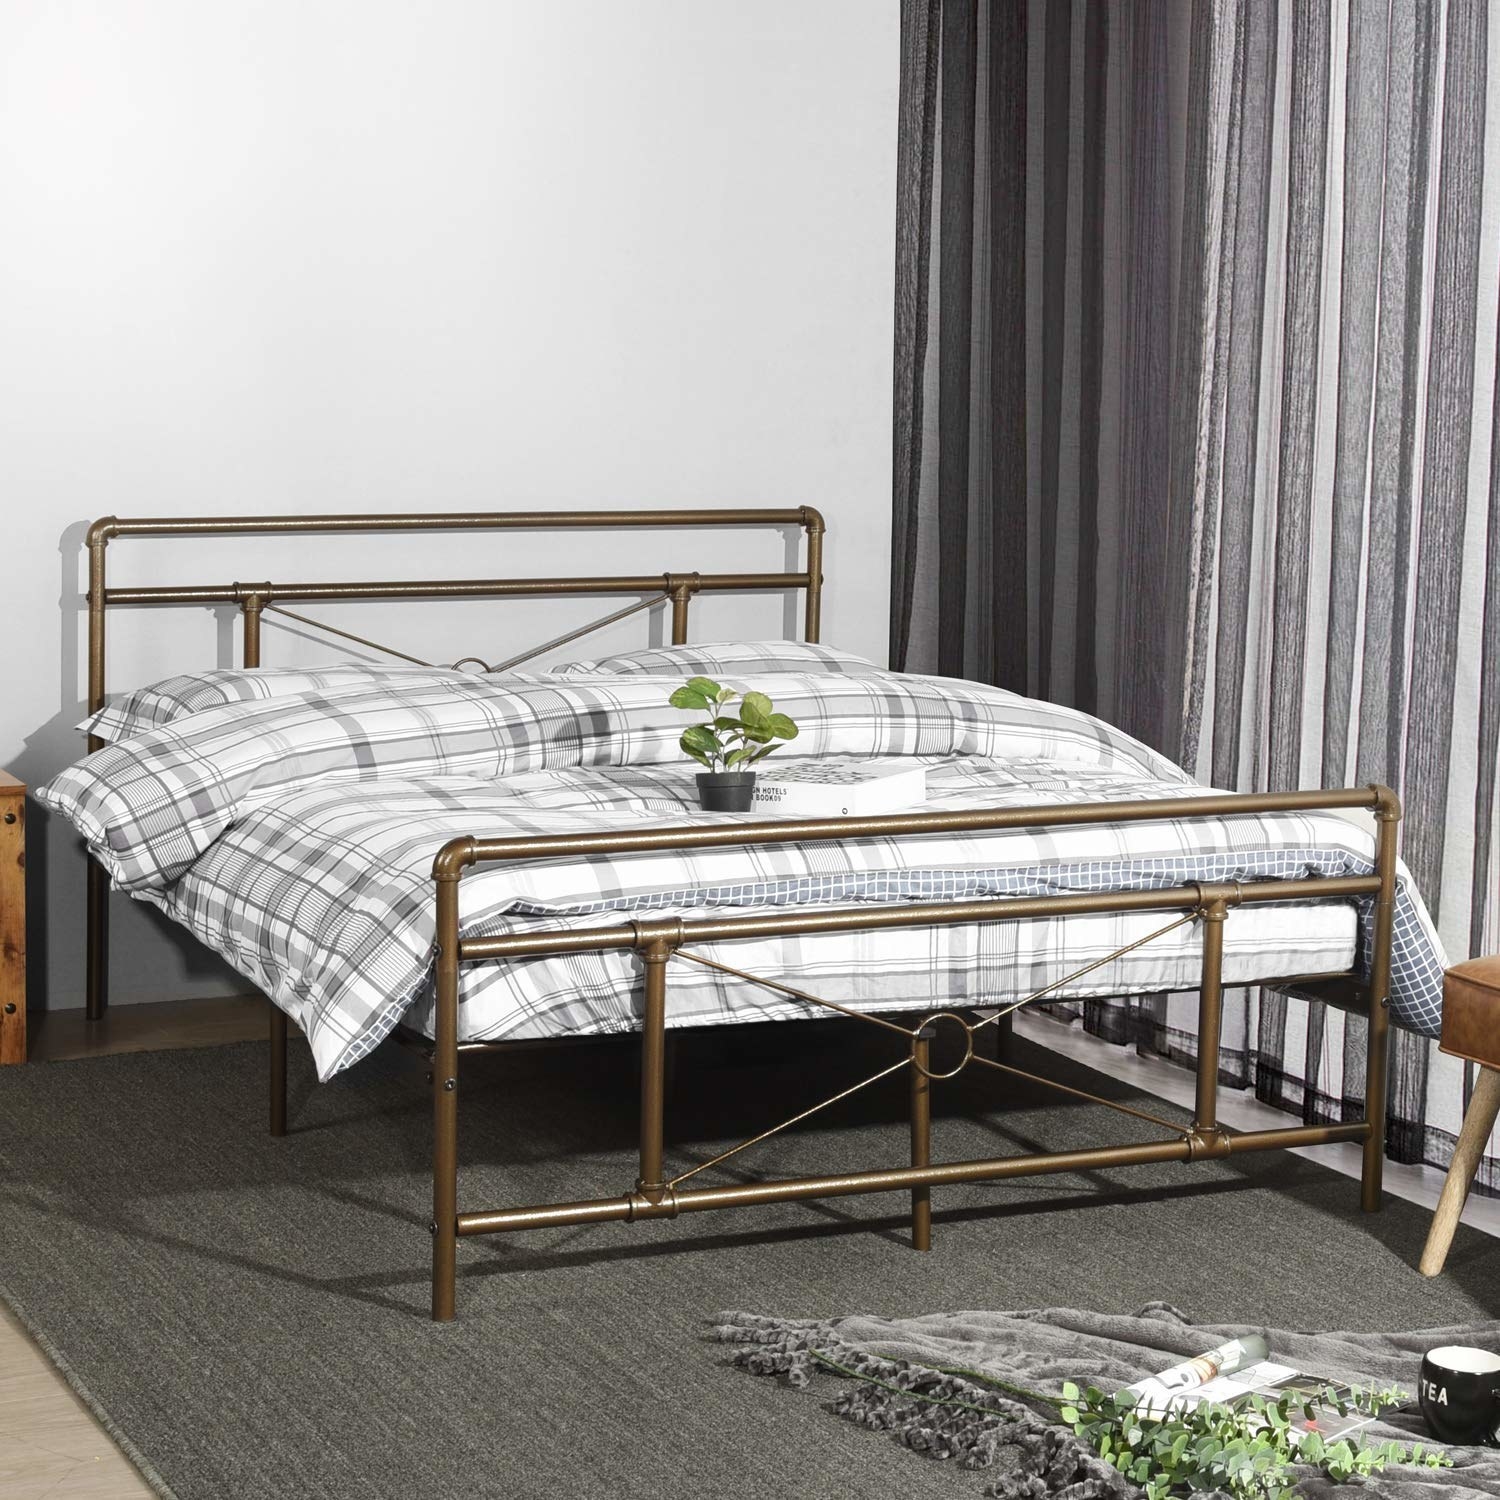 21 Cheap Bed Frames That Only Look